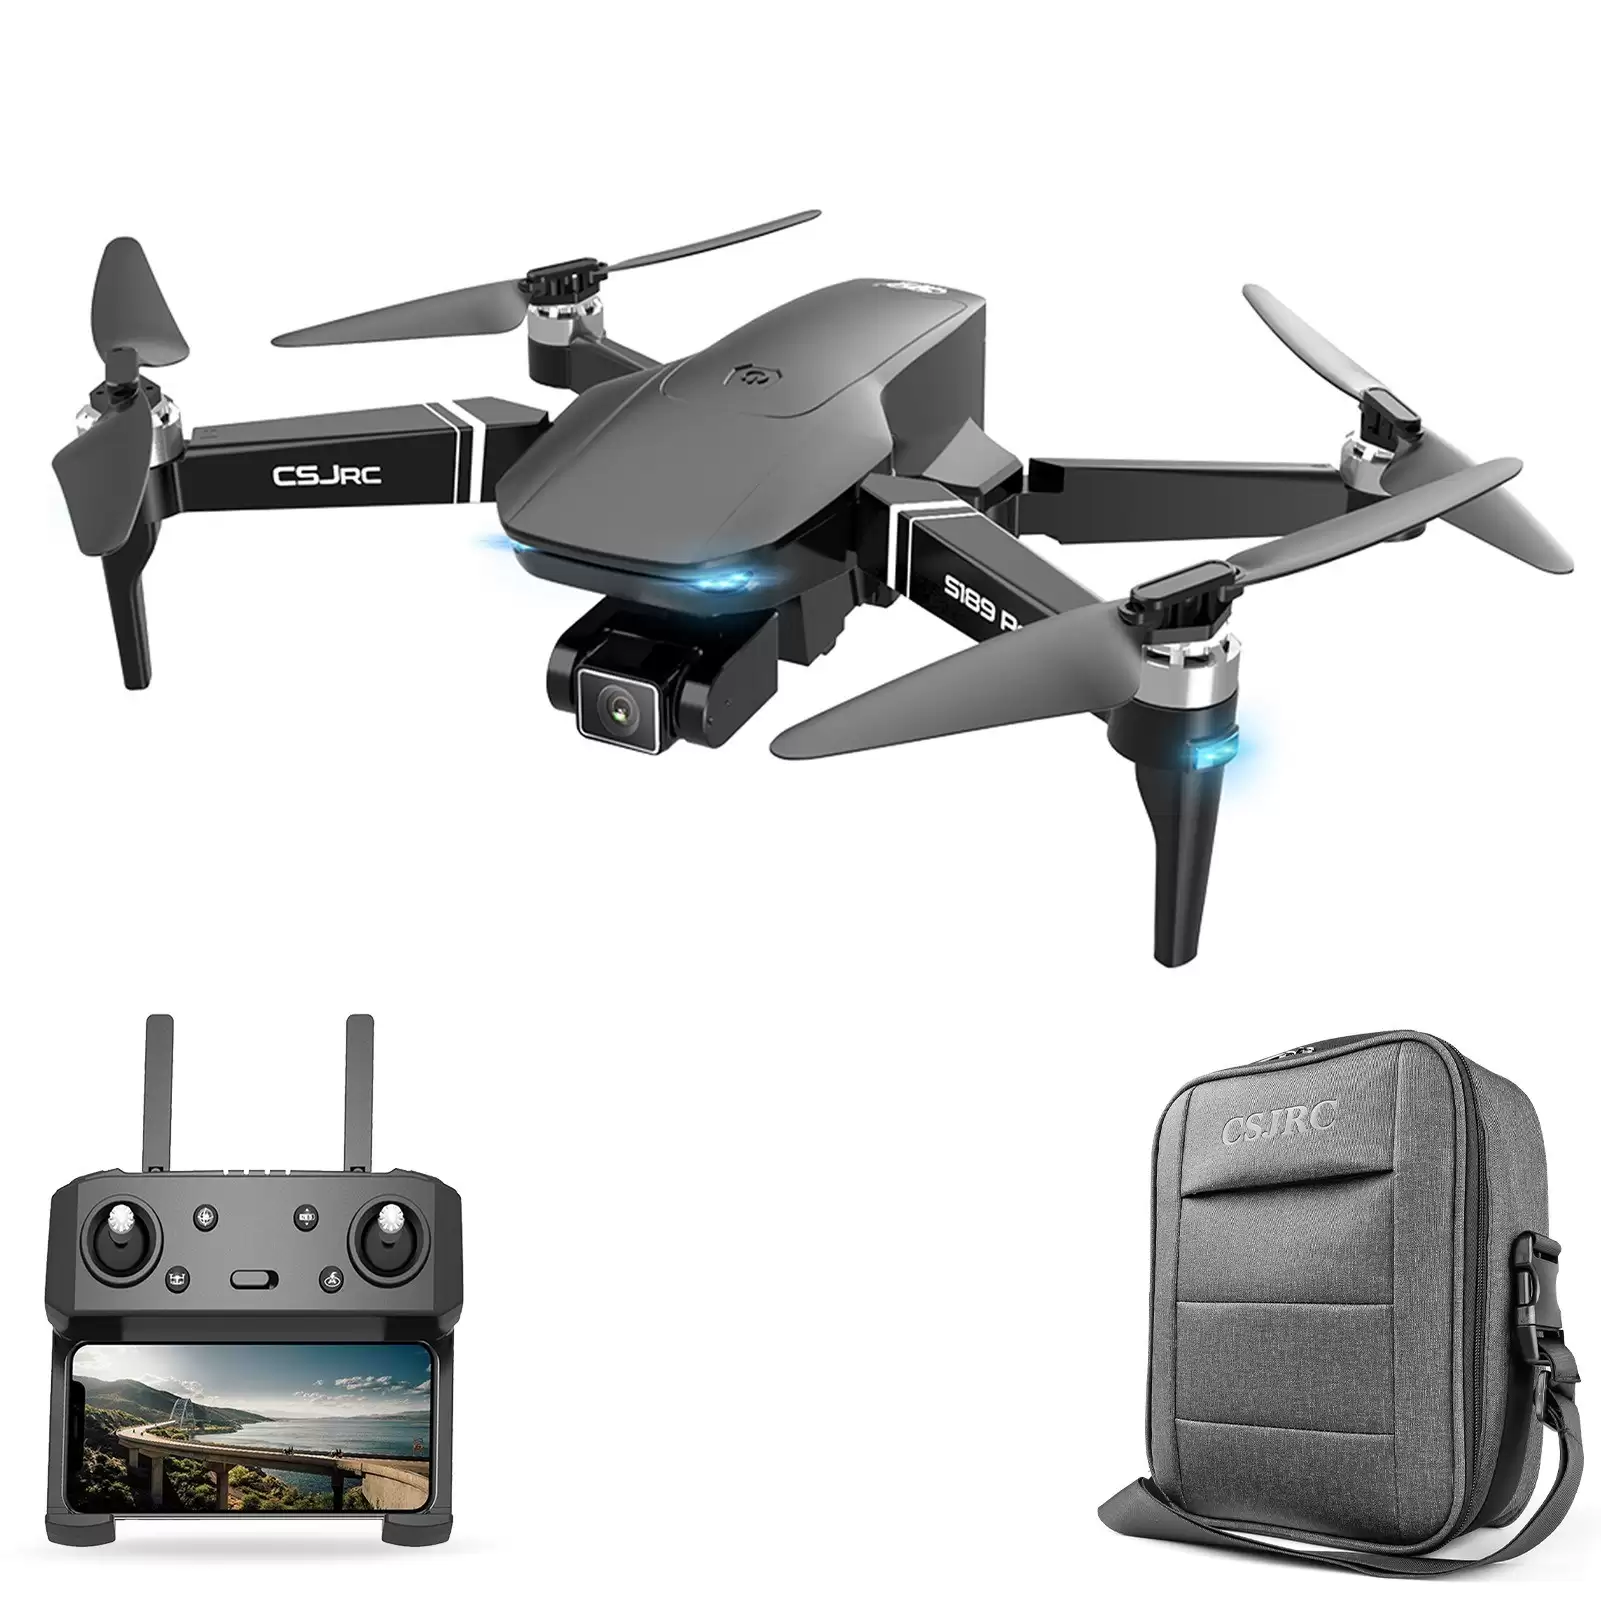 Order In Just $129.99 Extra $5 Off Csj S189 Pro 5g Wifi Fpv Gps 4k Camera Drone At Tomtop